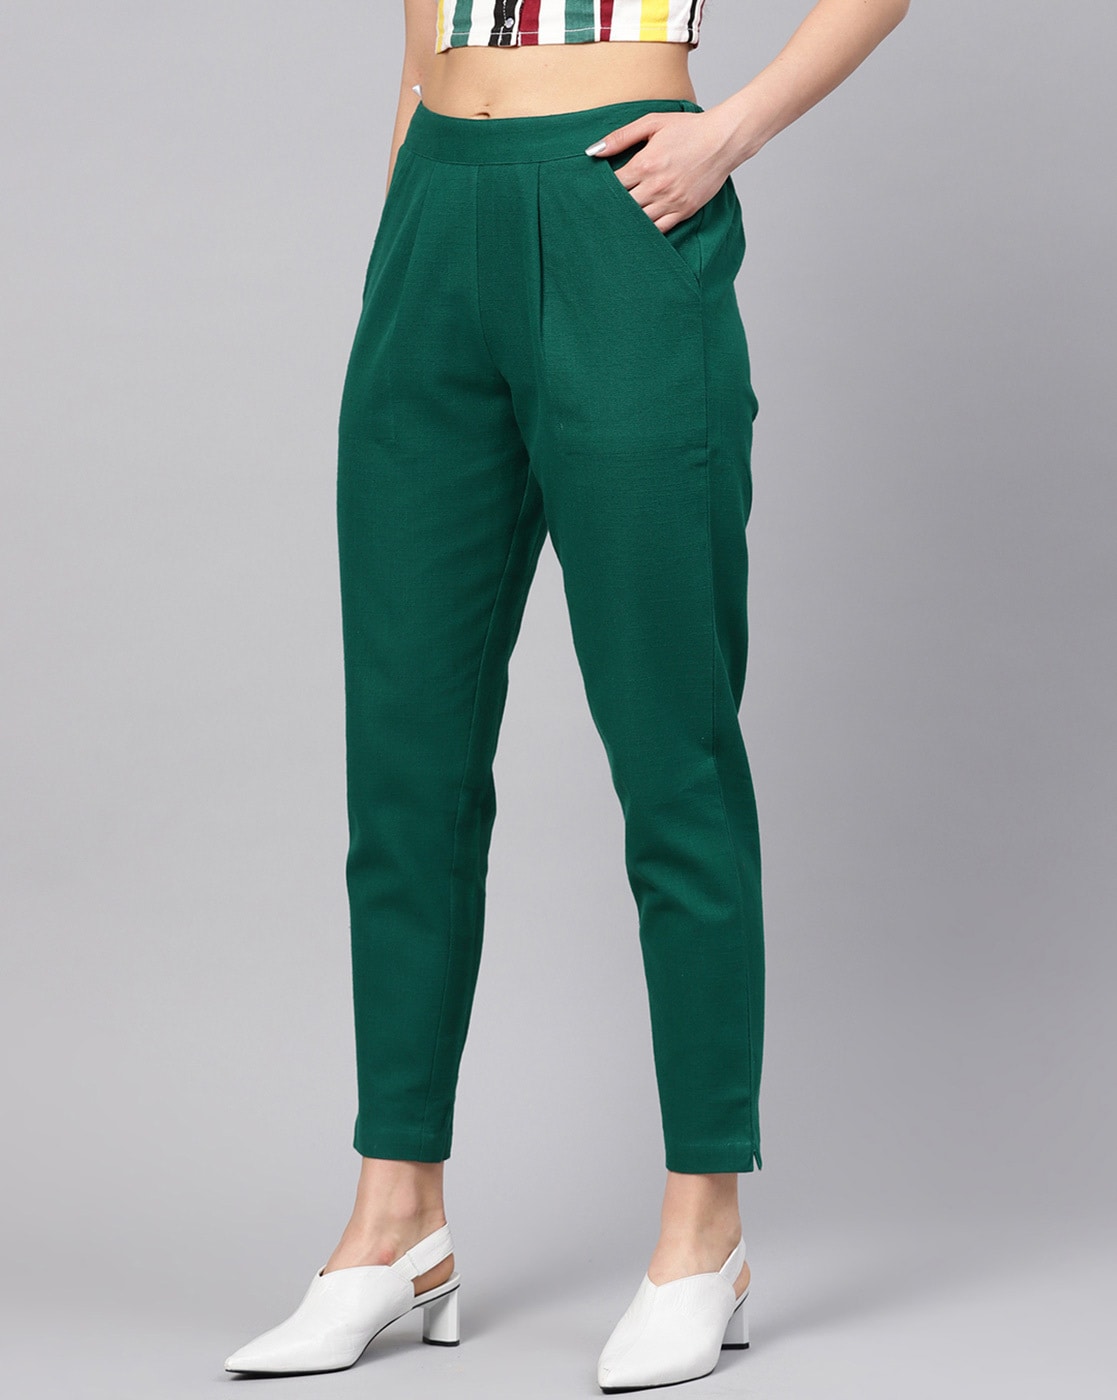 Buy Green Trousers & Pants for Women by Jaipur Kurti Online